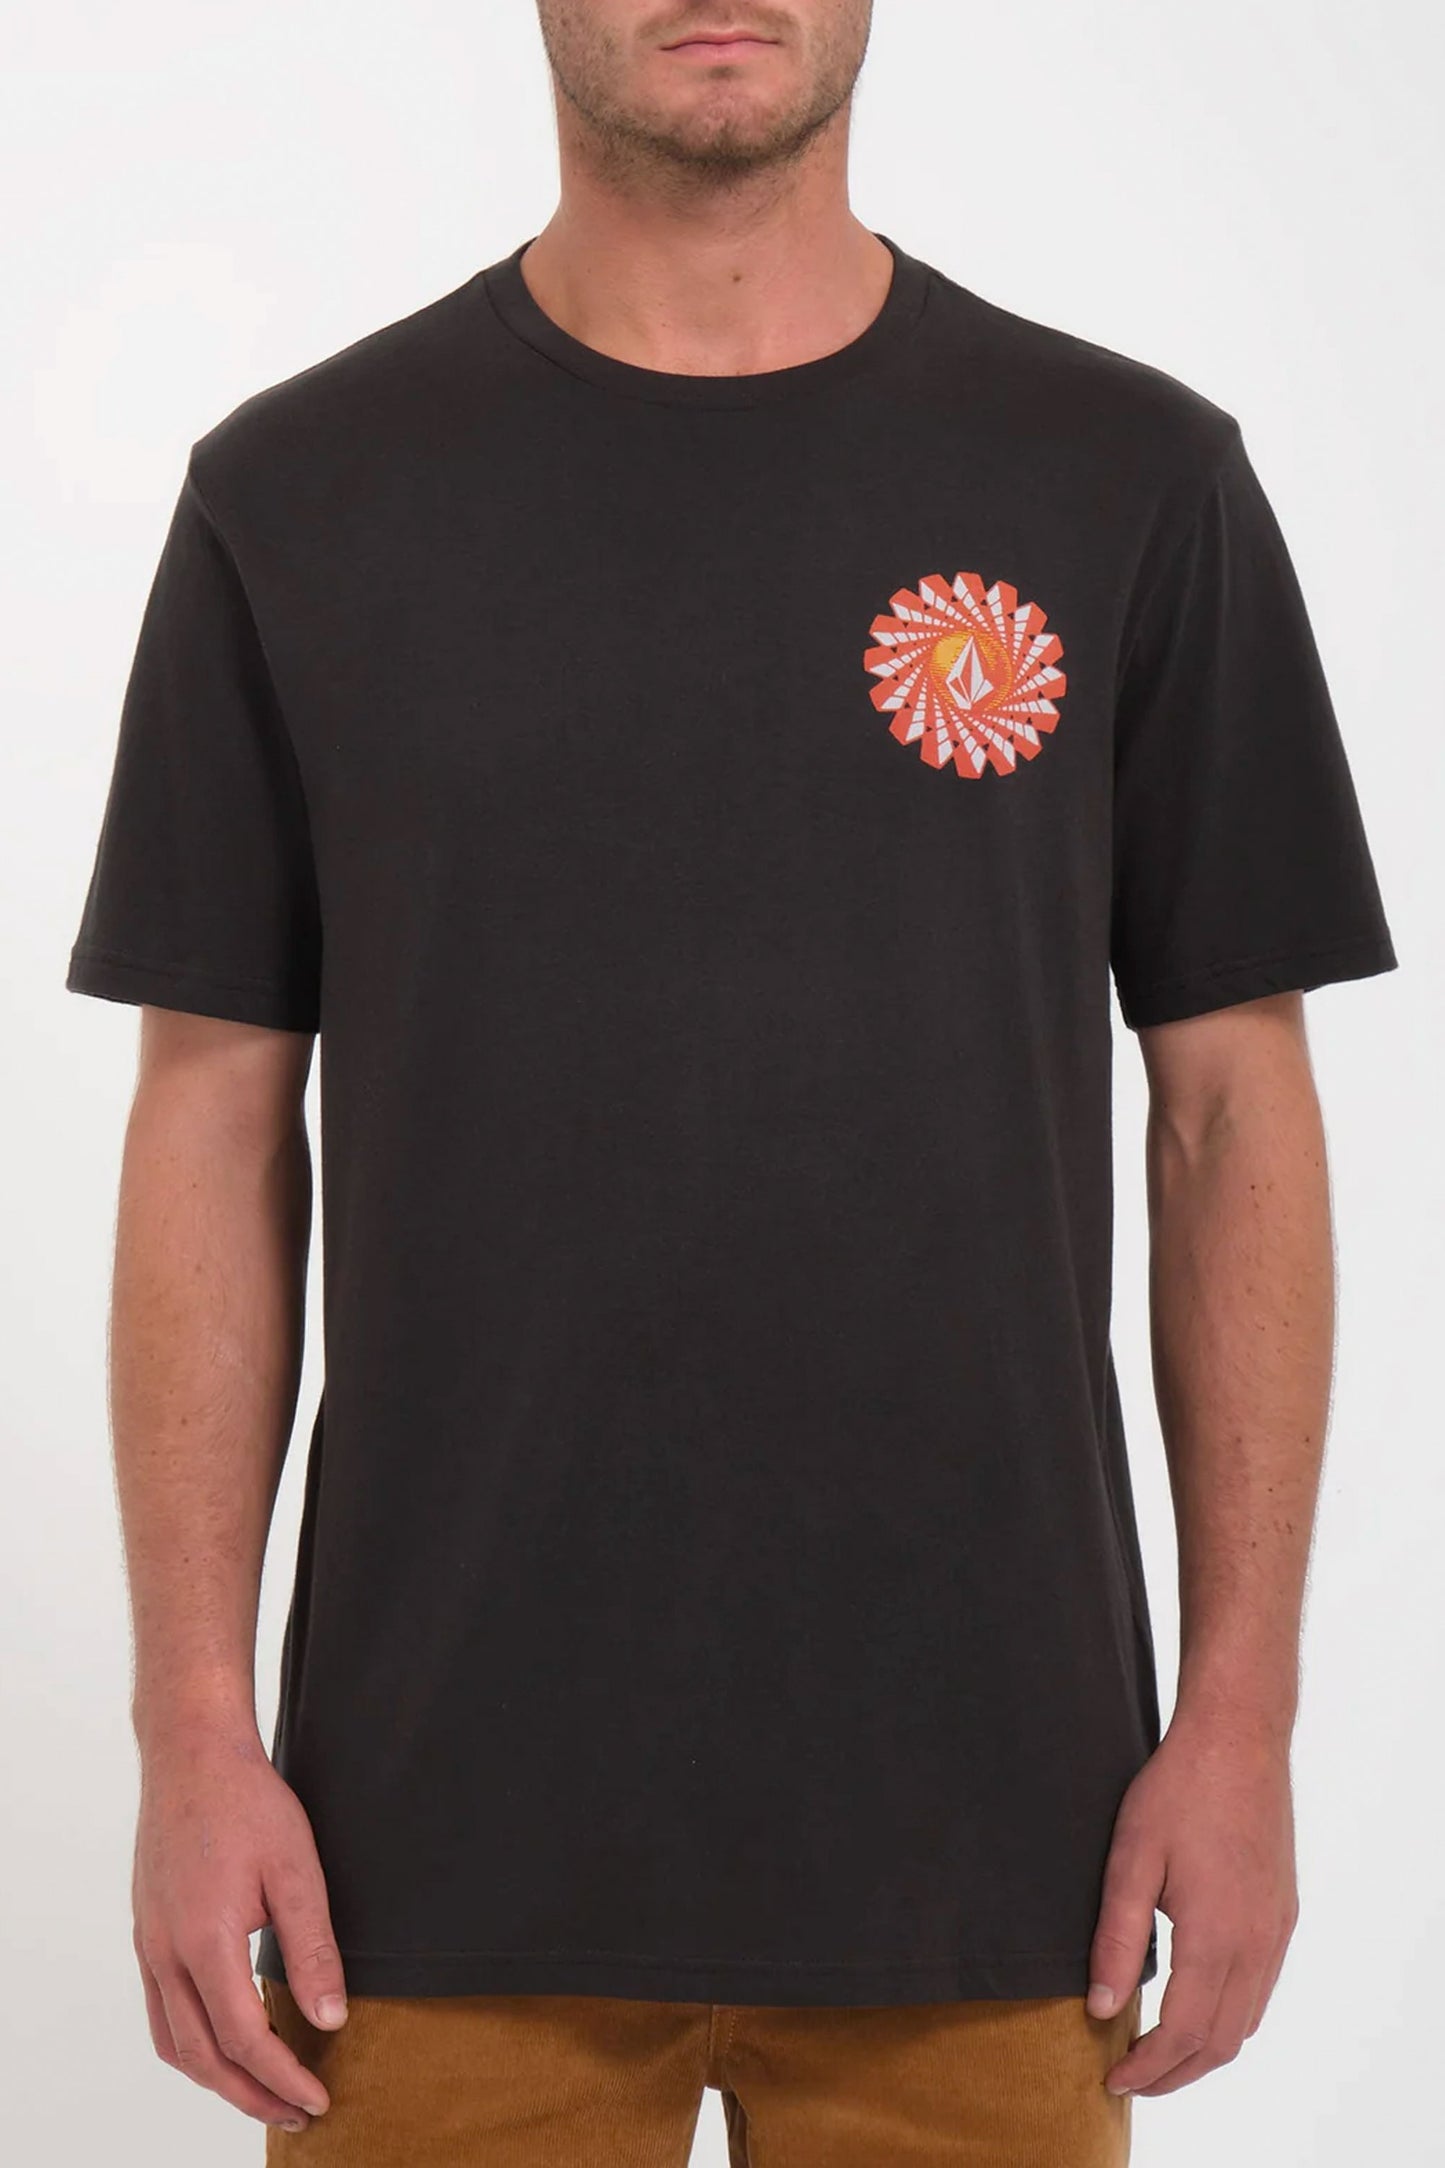 Pukas-Surf-Shop-Volcom-Tee-Fty-Molchat-Stealth